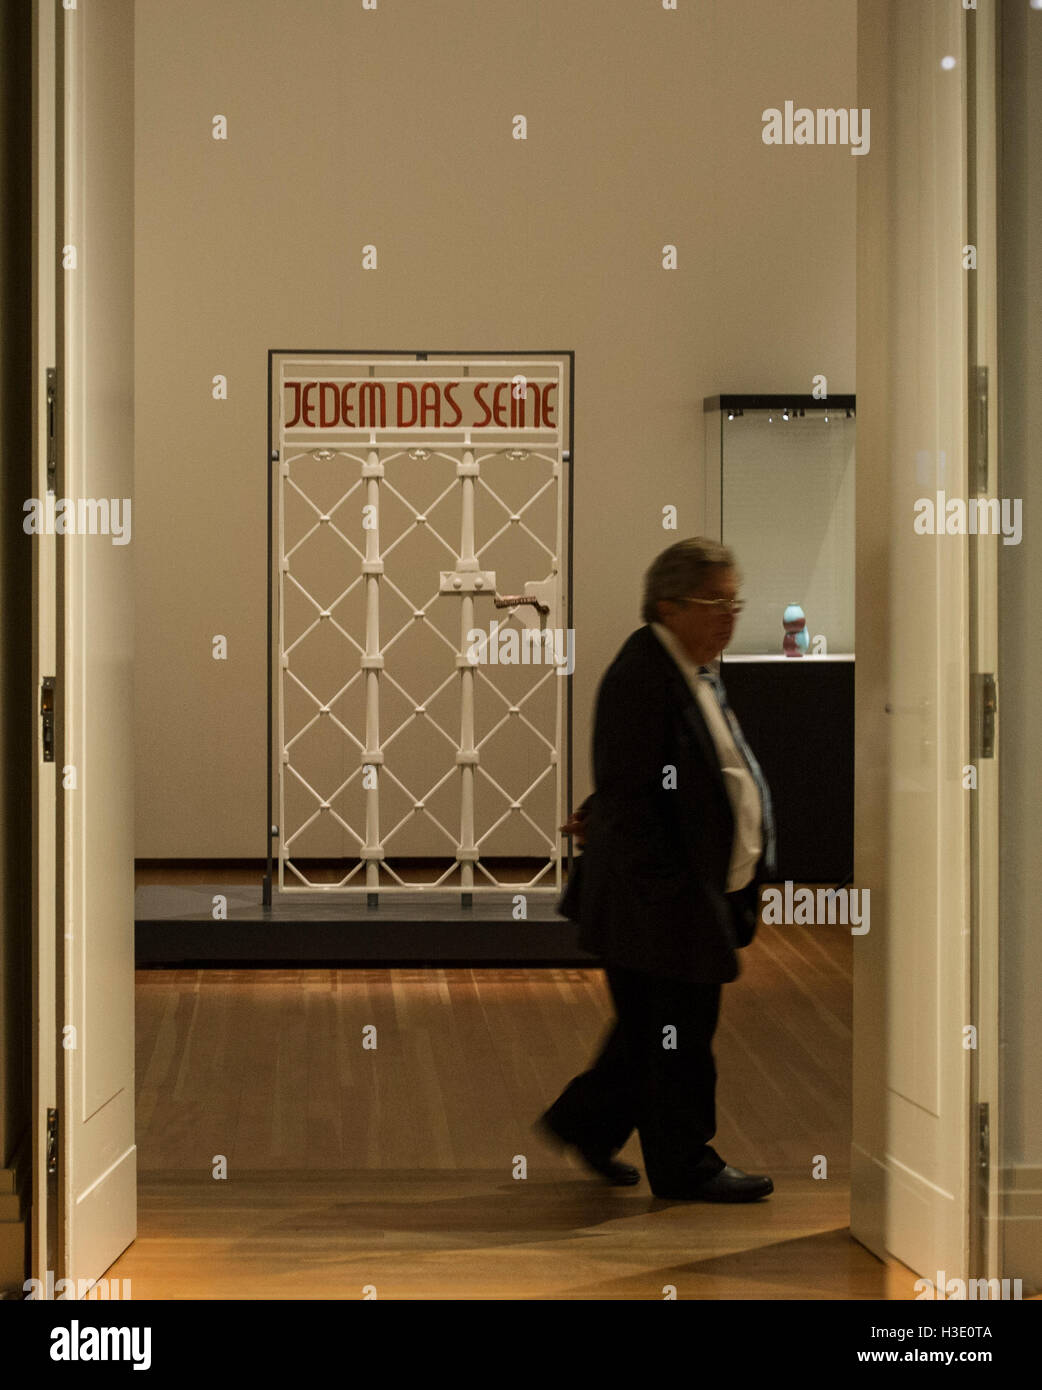 Berlin, Germany. 07th Oct, 2016. Journalists walk past the gate to Buchenwald concentration camp with the lettering 'Jedem das Seine' during the press preview of the exhibition 'Deutschland - Erinnerungen einer Nation' (lit. Germany - Memories of a Nation) at Martin-Gropius-Bau in Berlin, Germany, 07 October 2016. PHOTO: PAUL ZINKEN/DPA/Alamy Live News Stock Photo